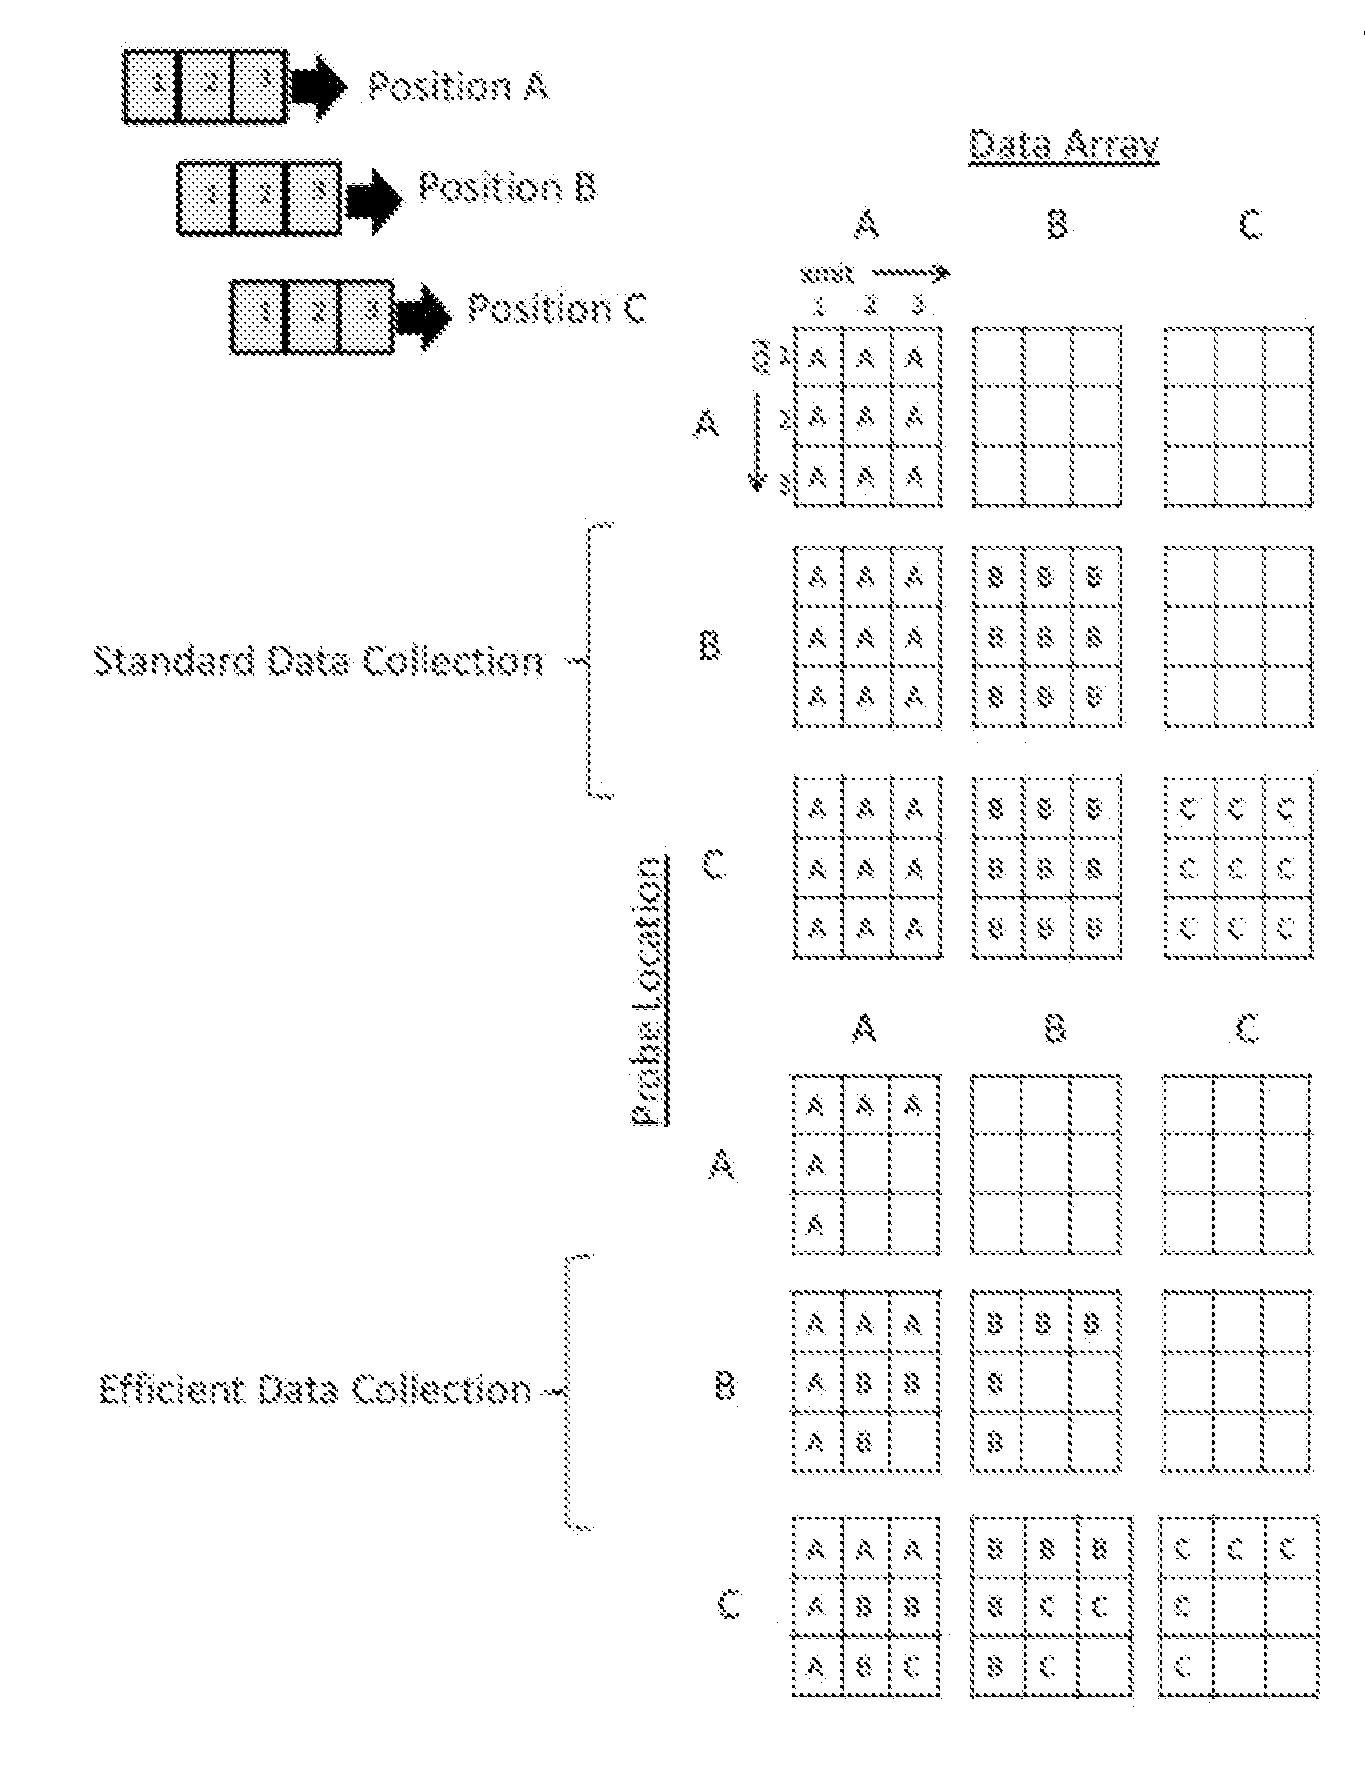 Synthetic data collection method for full matrix capture using an ultrasound array